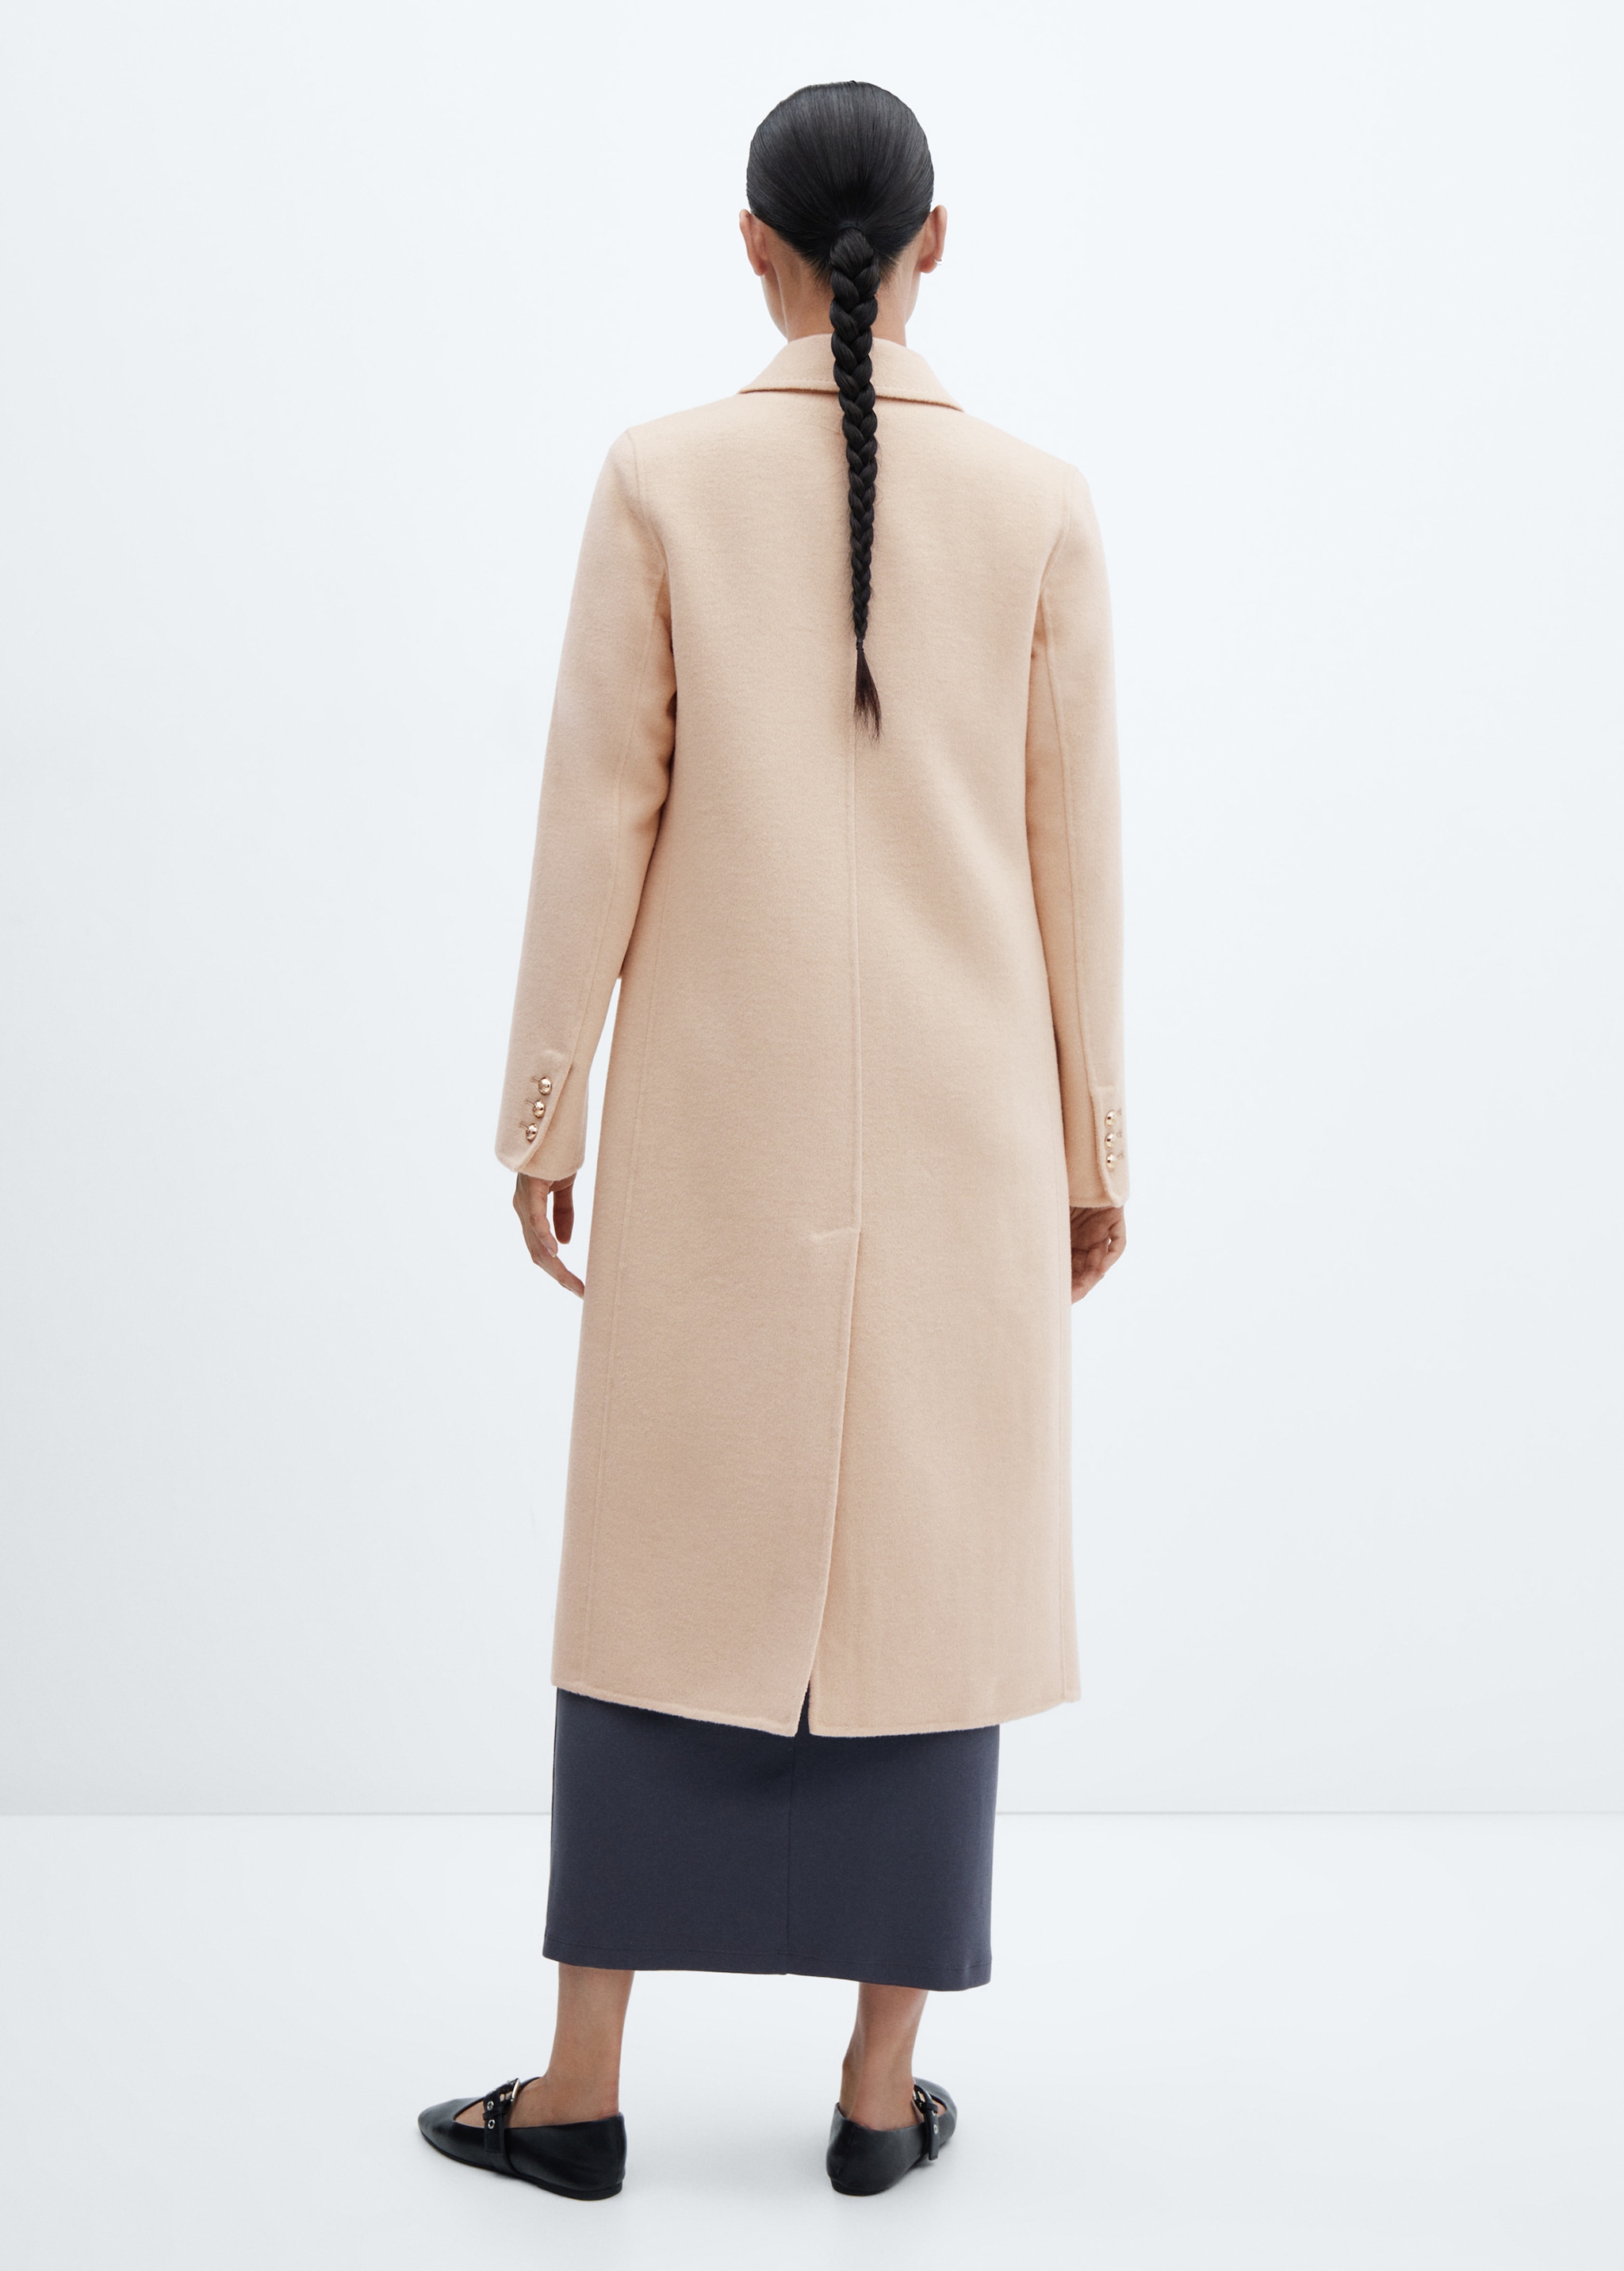 Handmade buttoned wool coat - Reverse of the article